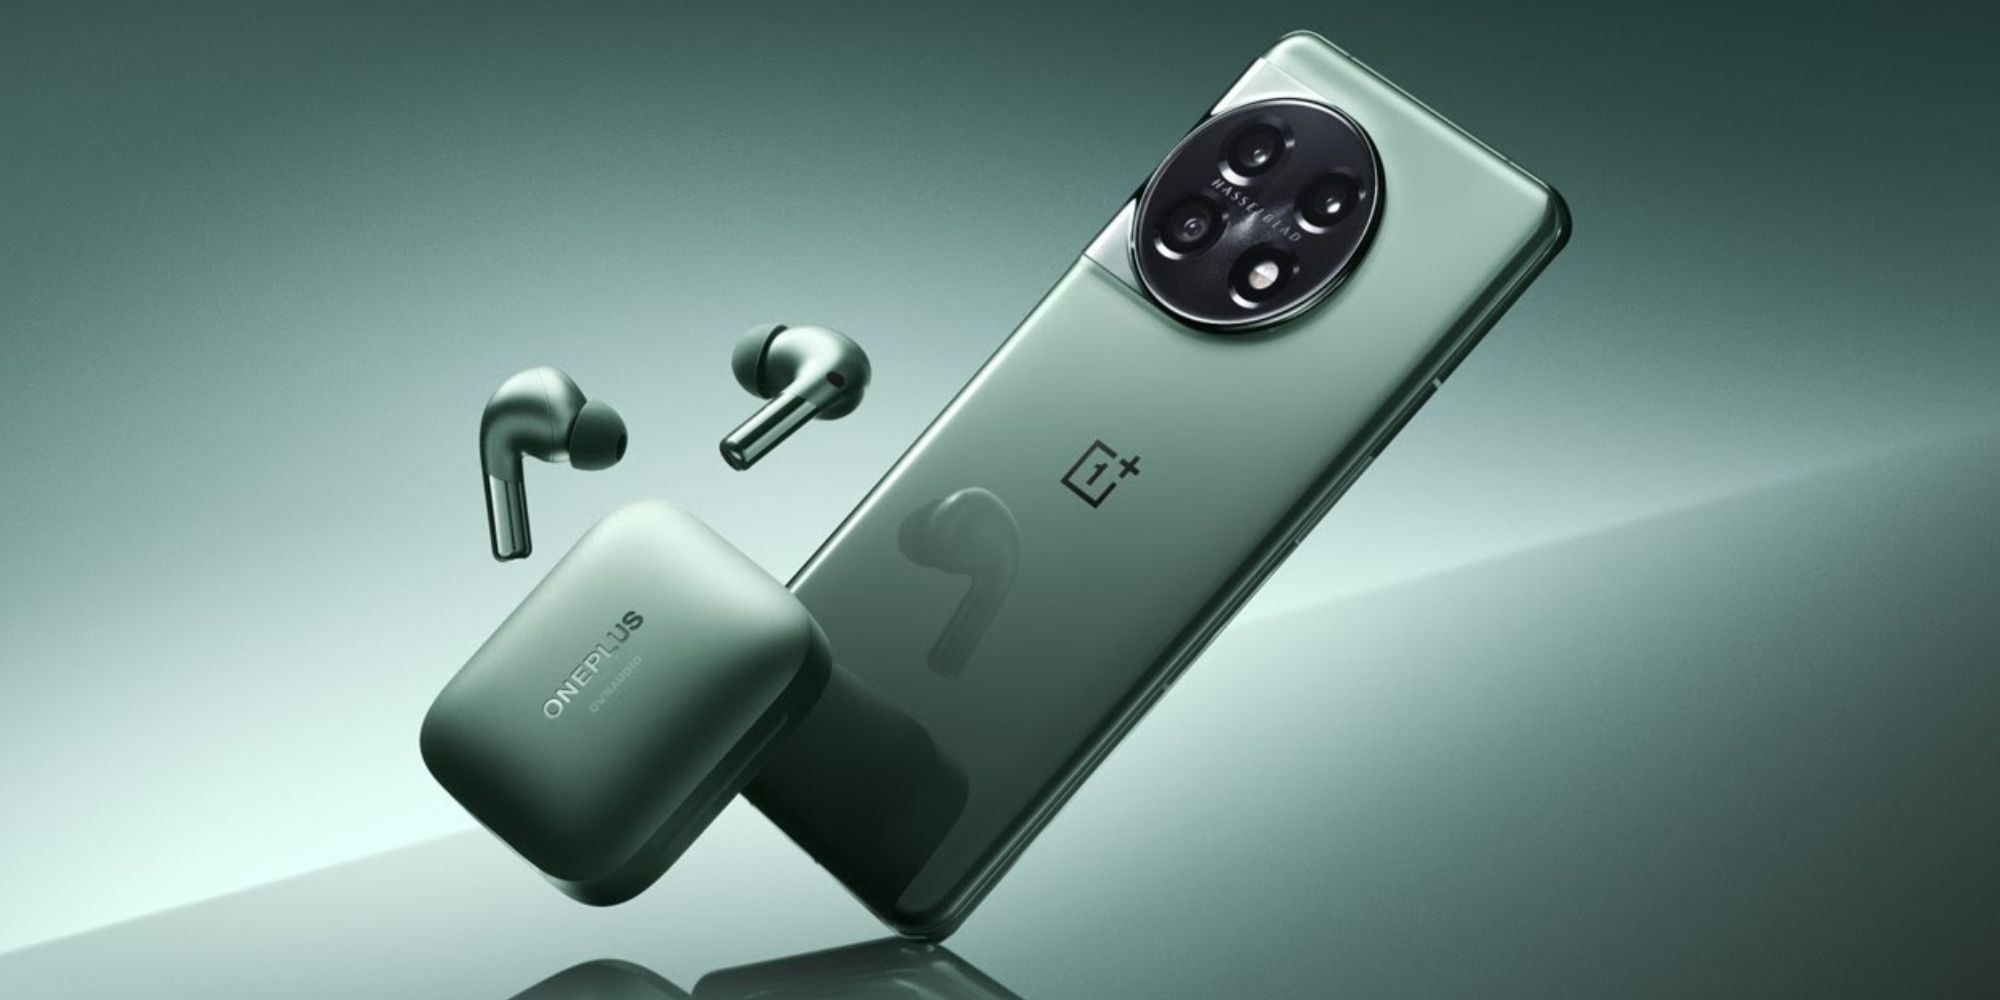 Image of OnePlus 11 and the OnePlus Buds Pro 2, both in the green color